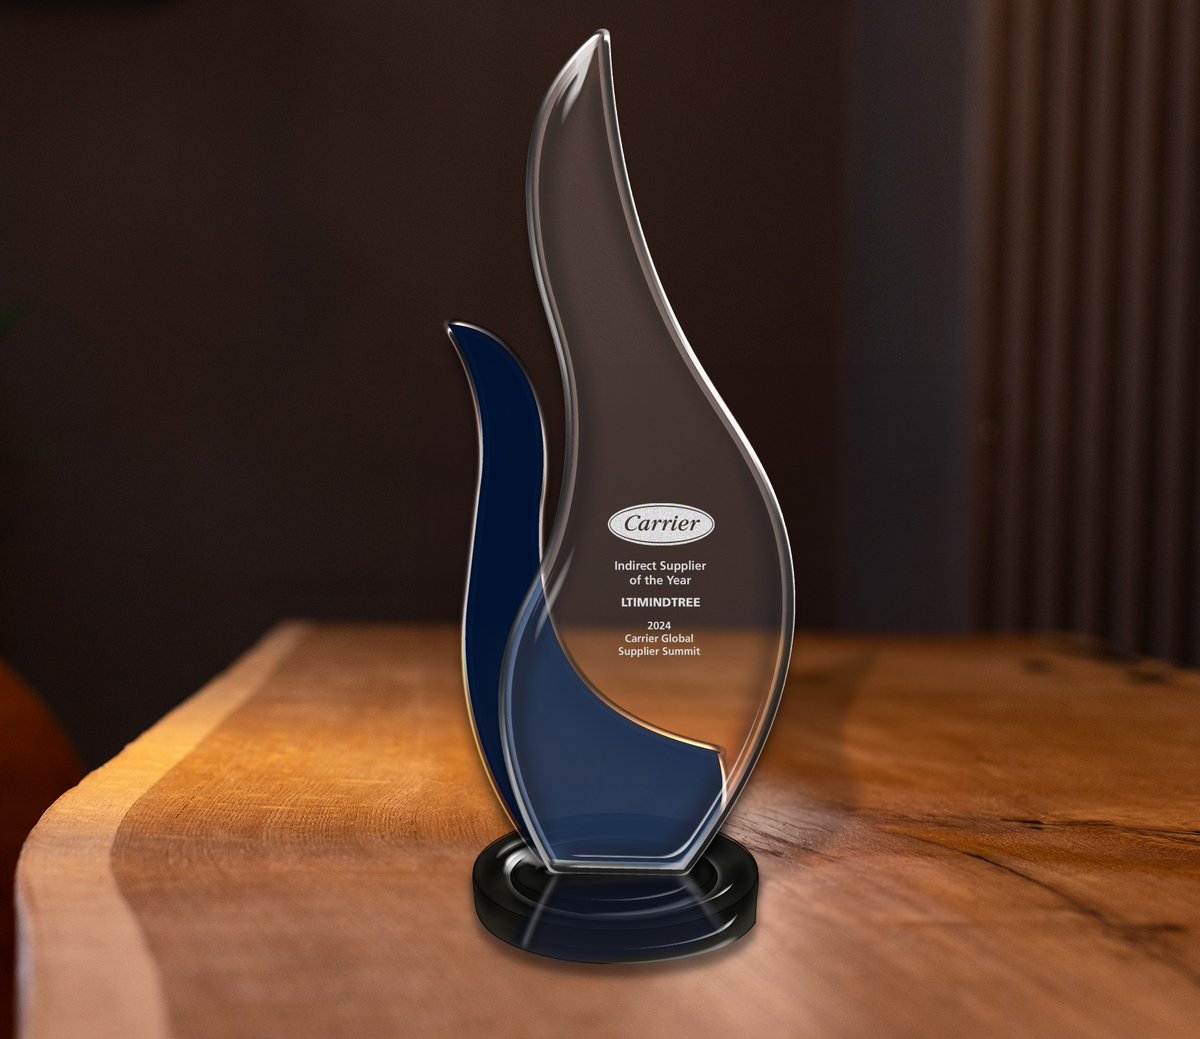 We’re honored to receive Carrier’s 2024 Indirect Supplier of the Year Award at the #Carrier Global Supplier Summit. This award celebrates our 15+ year collaboration, delivering excellence in AMS & IT initiatives. Thank you, @carrier, for this recognition! srkl.in/6016BNOBIo